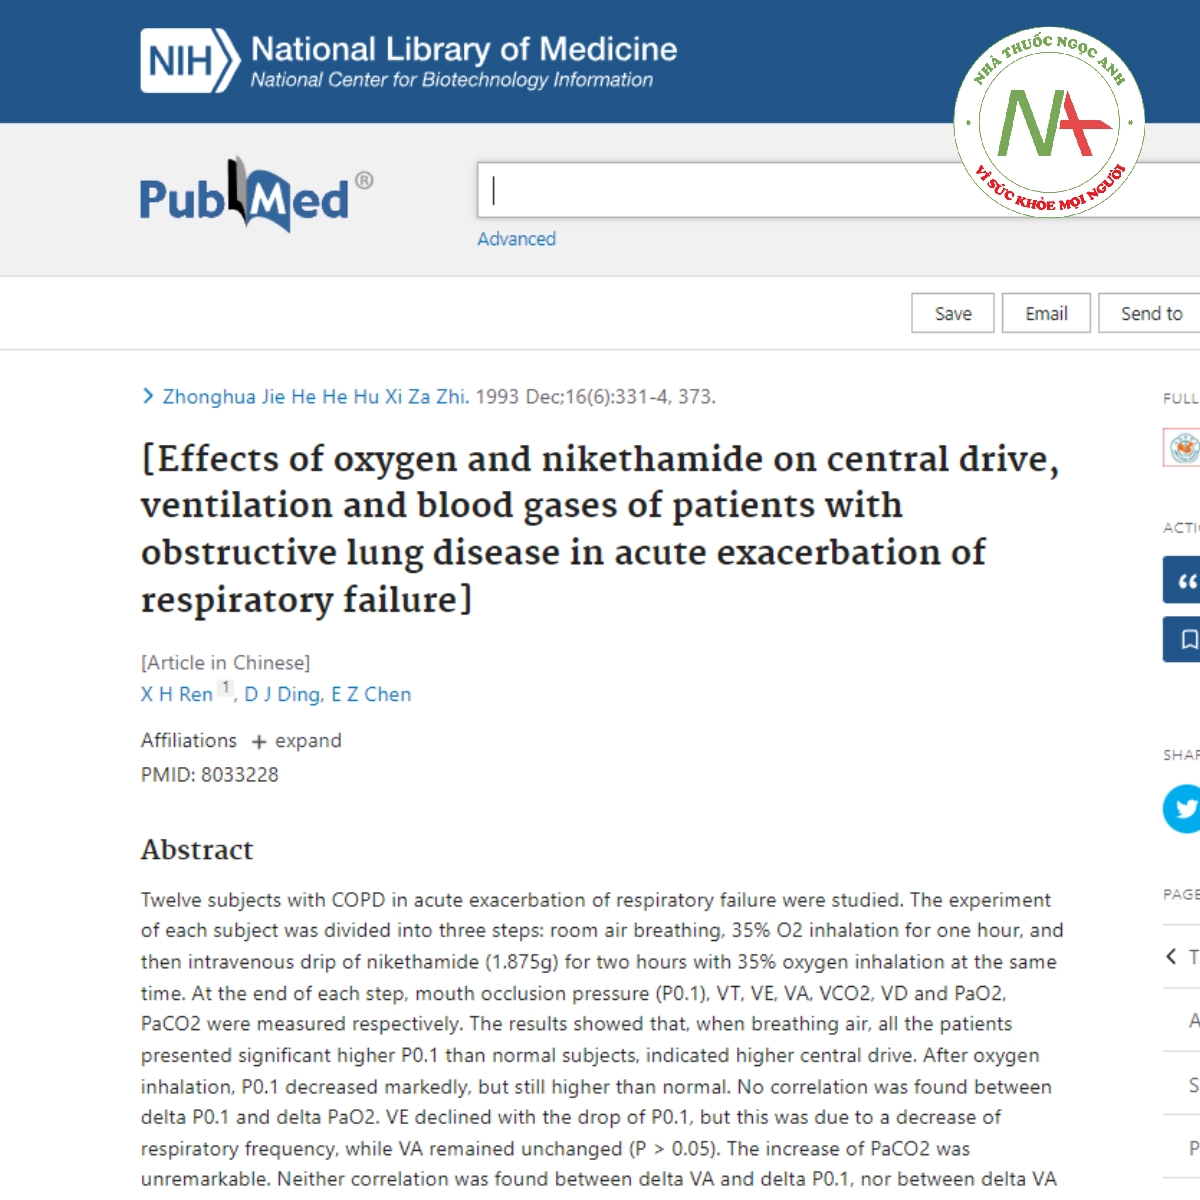 Effects of oxygen and nikethamide on central drive, ventilation and blood gases of patients with obstructive lung disease in acute exacerbation of respiratory failure